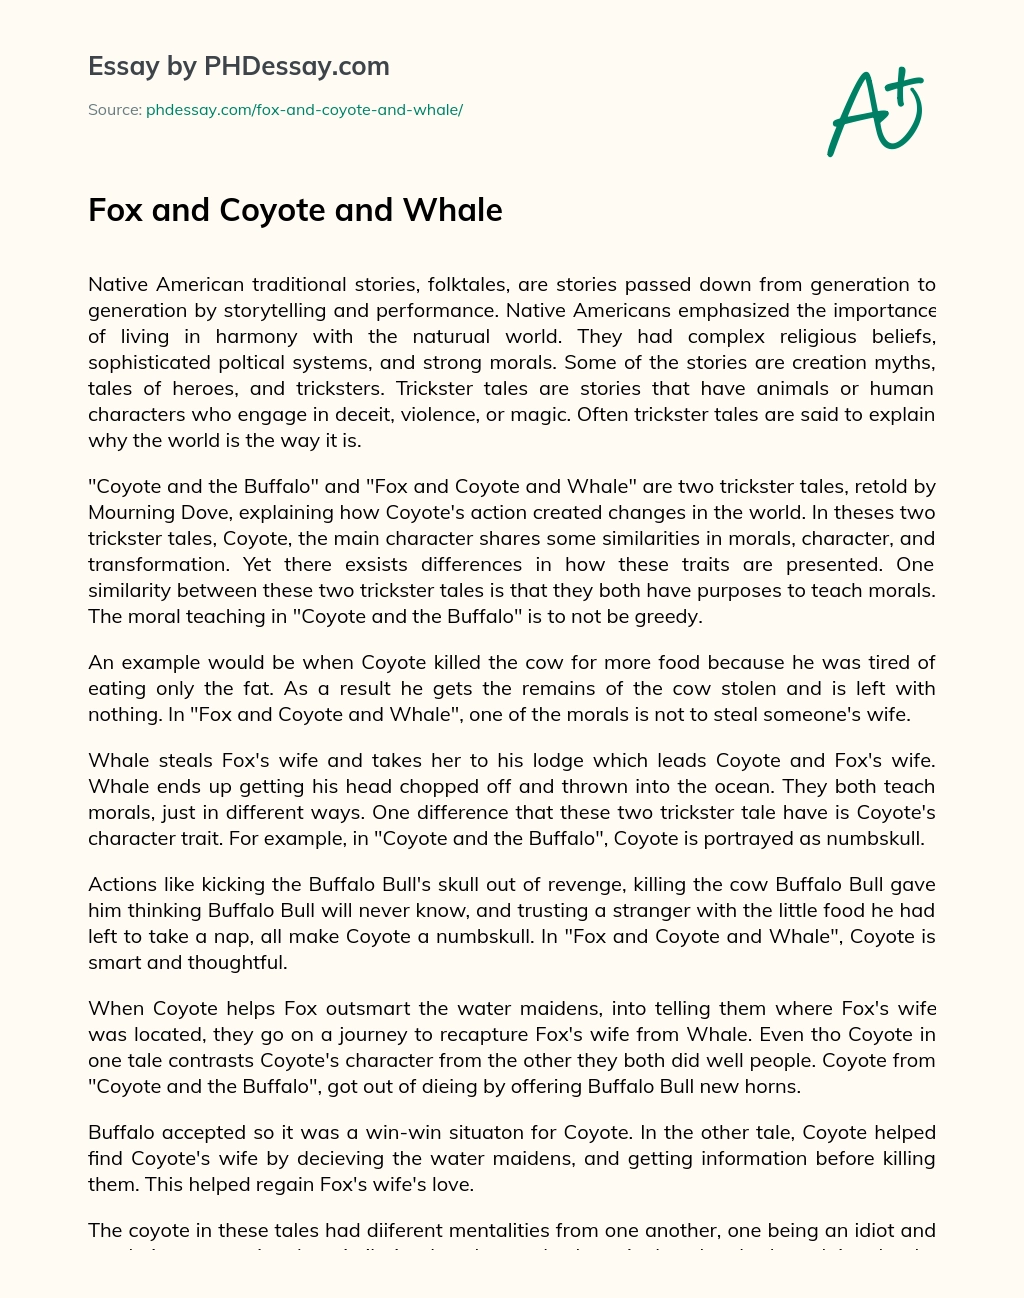 Fox and Coyote and Whale essay